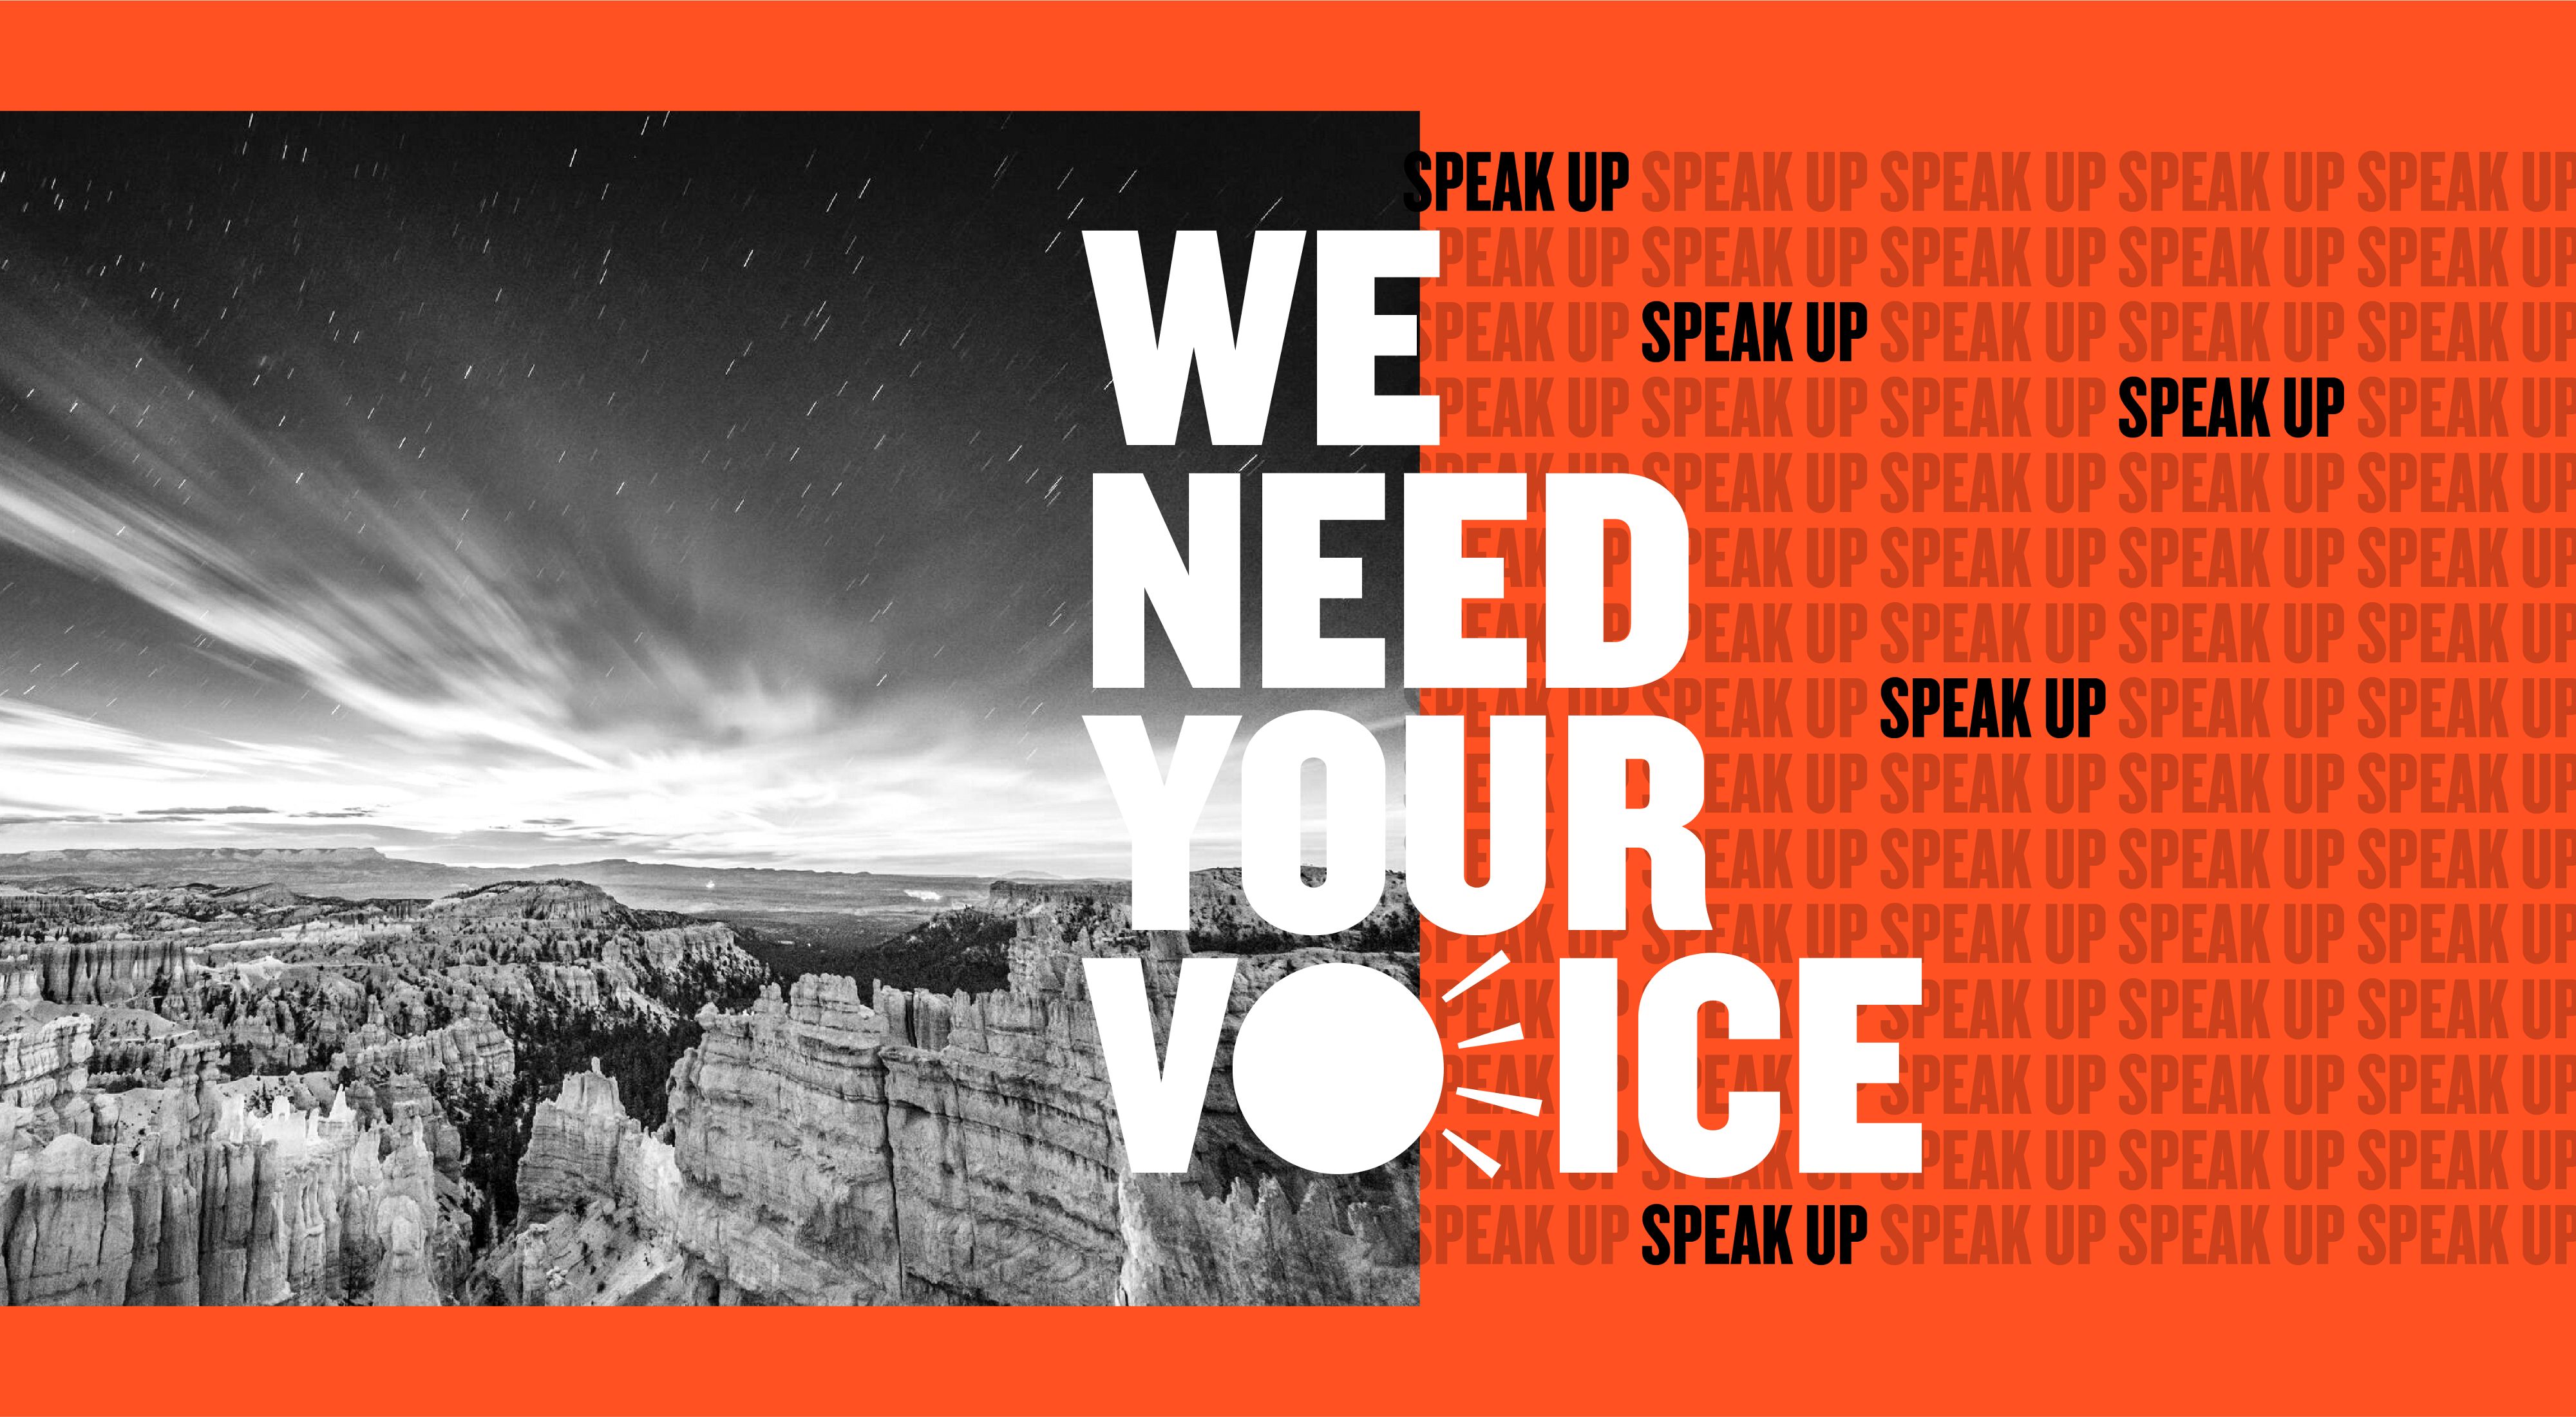 Black and white landscape photo of Bryce Canyon National Park with text that says "We need your voice" and "speak up".